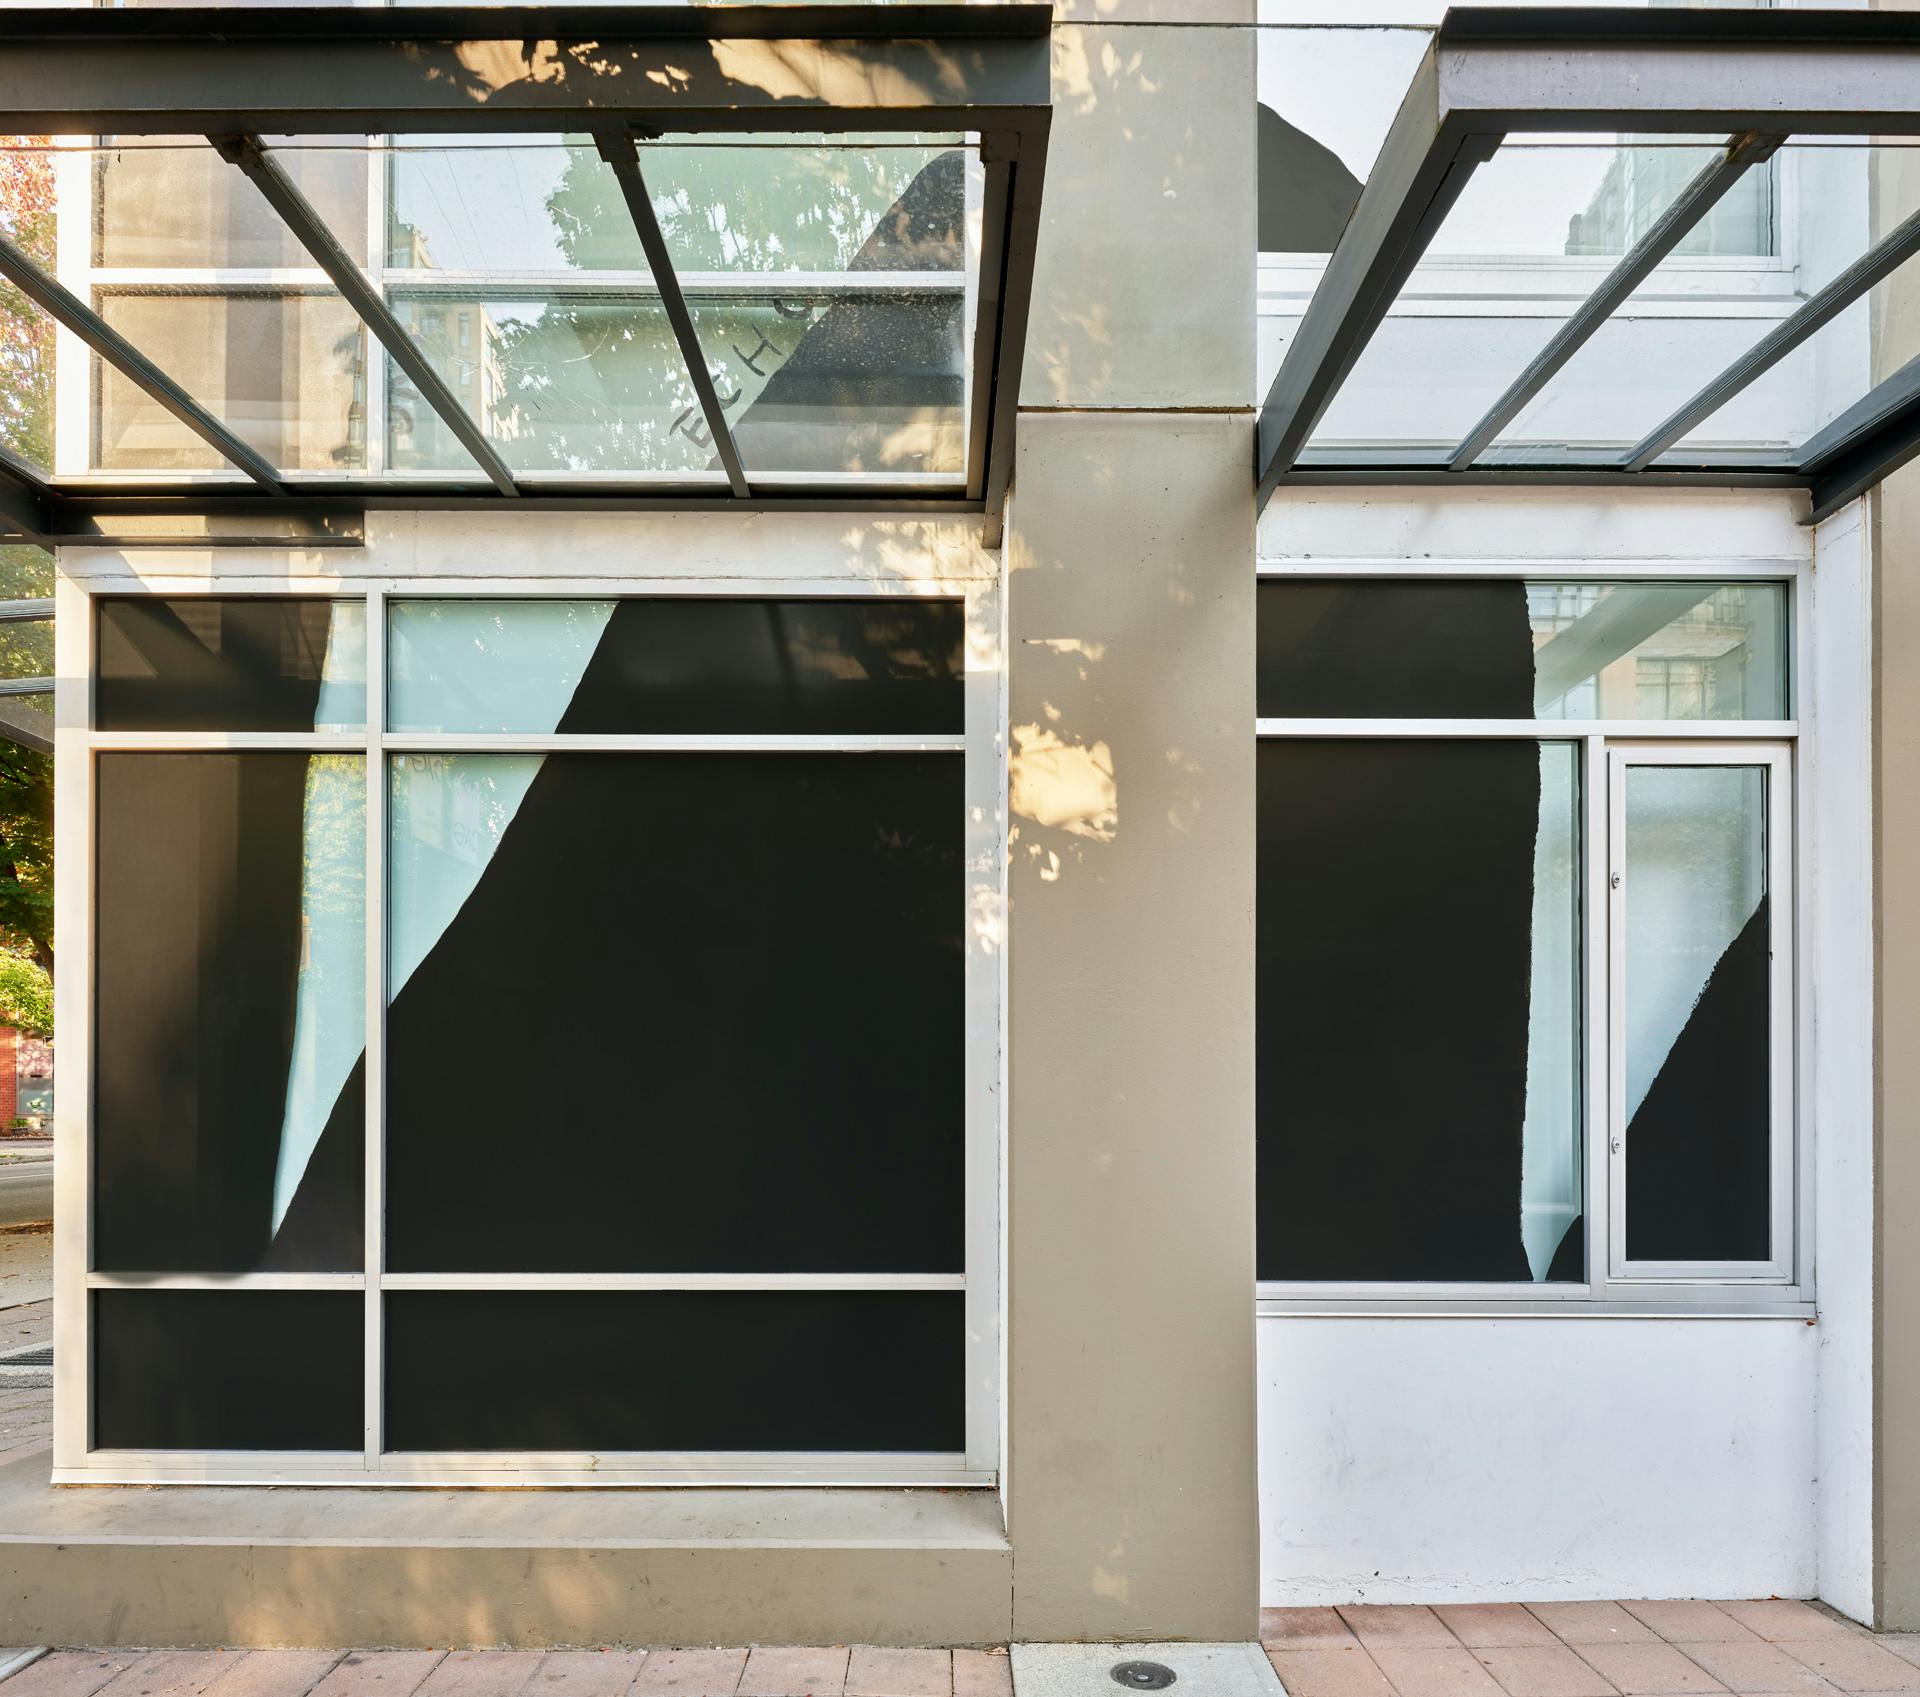 Facade of CAG with four windows in a 4 by 4 grid visible in frame. Black and white drawings by Christine Sun Kim featuring the word "echo" across the windows.